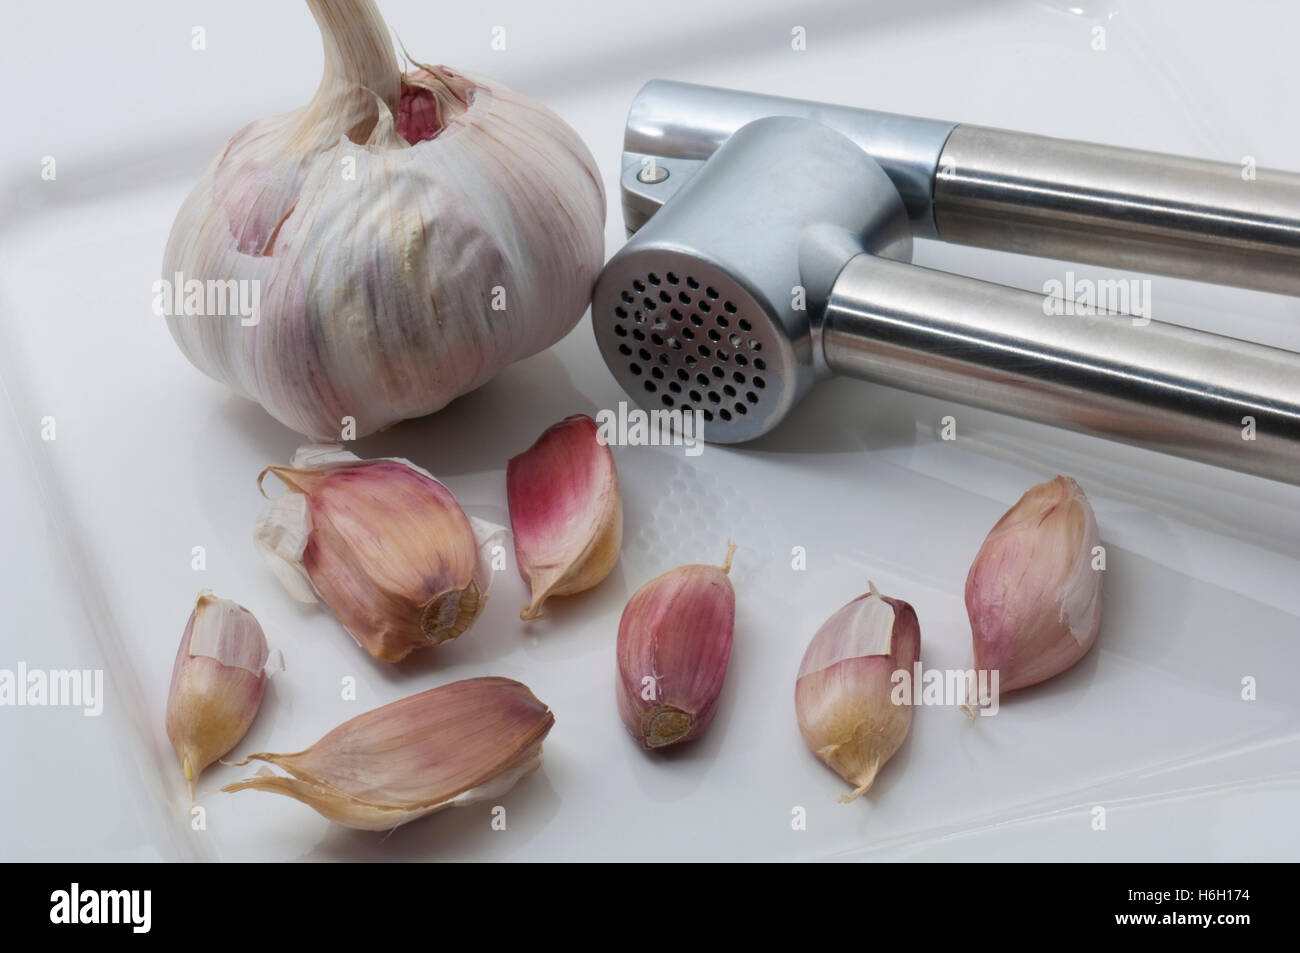 Garlic with a garlic press on a plate Stock Photo